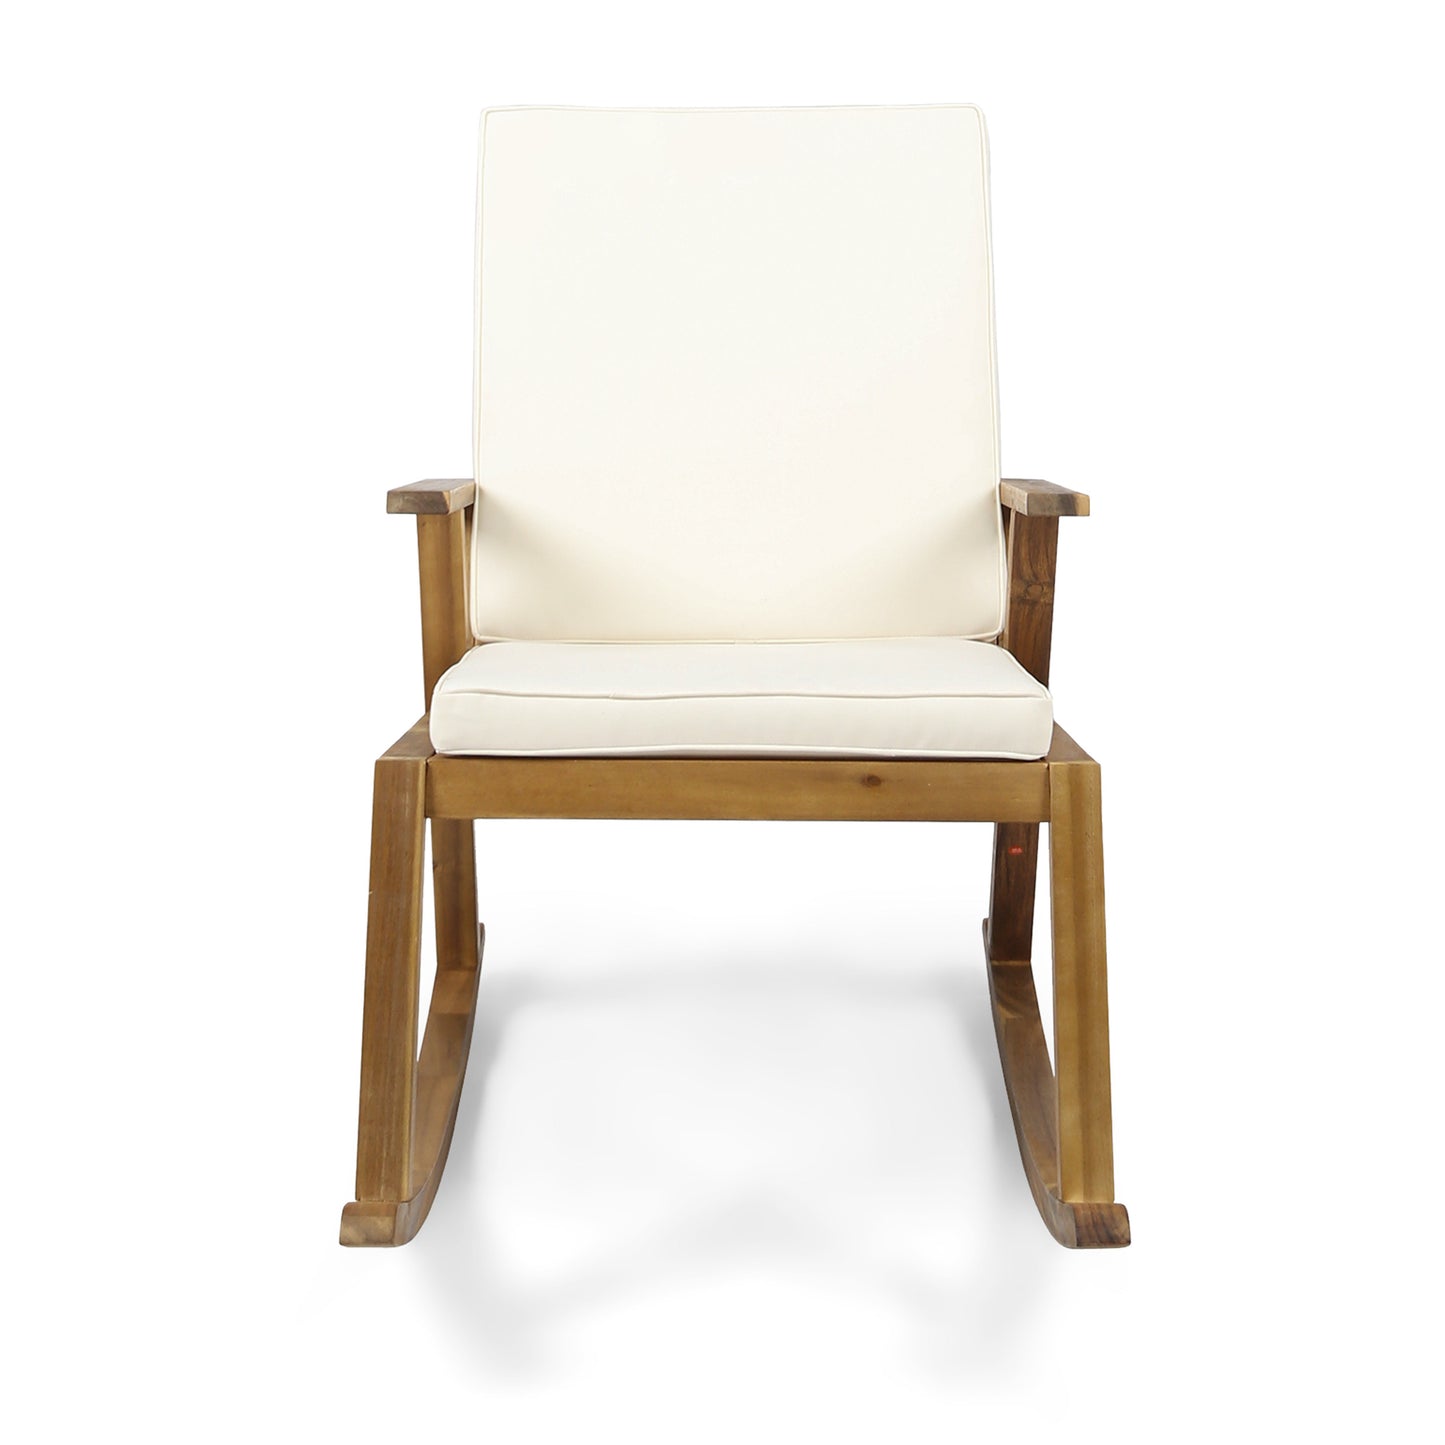 Andy Outdoor Acacia Wood Rocking Chair with Water-Resistant Cushions